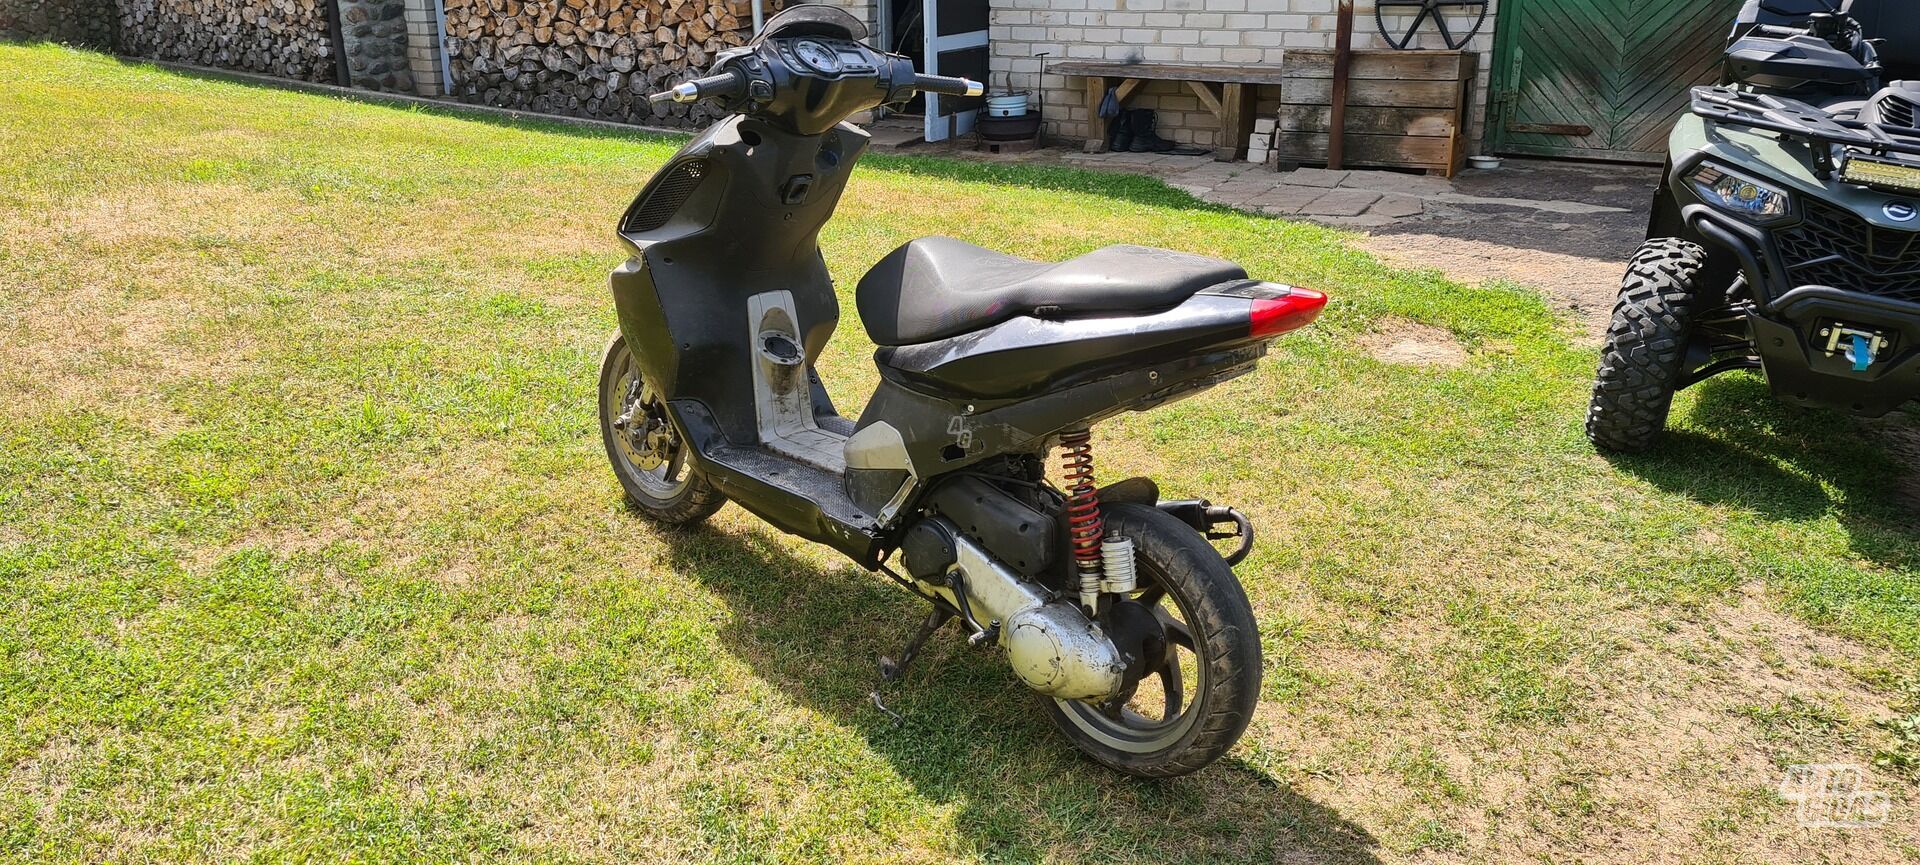 Piaggio NRG 2008 y Scooter / moped